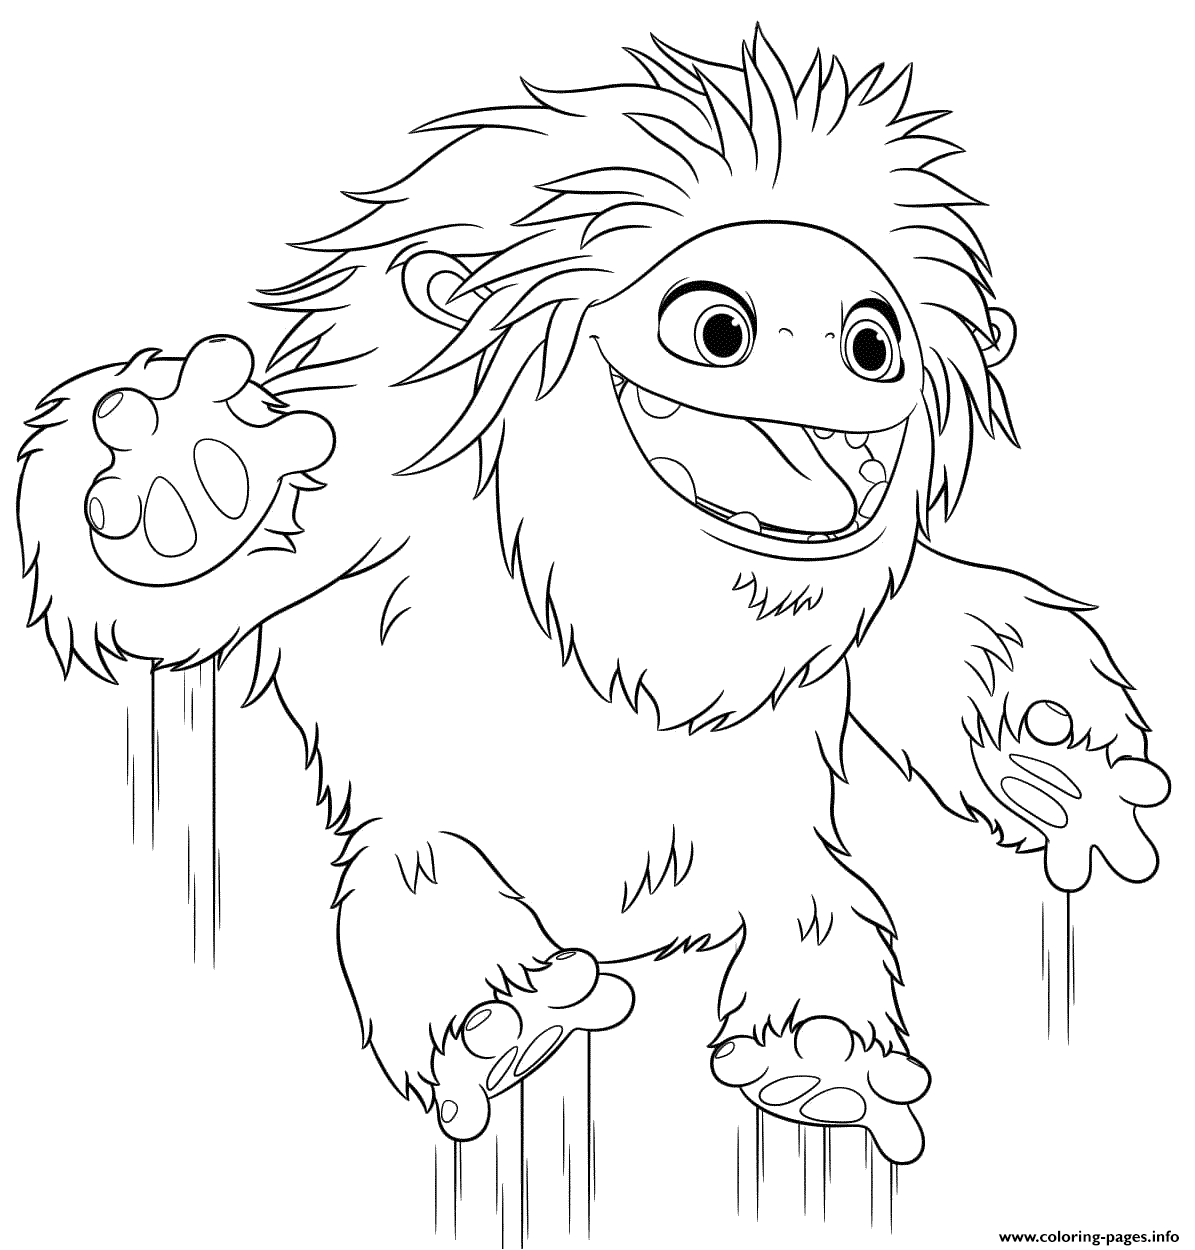 Yeti Coloring Pages - Coloring Home